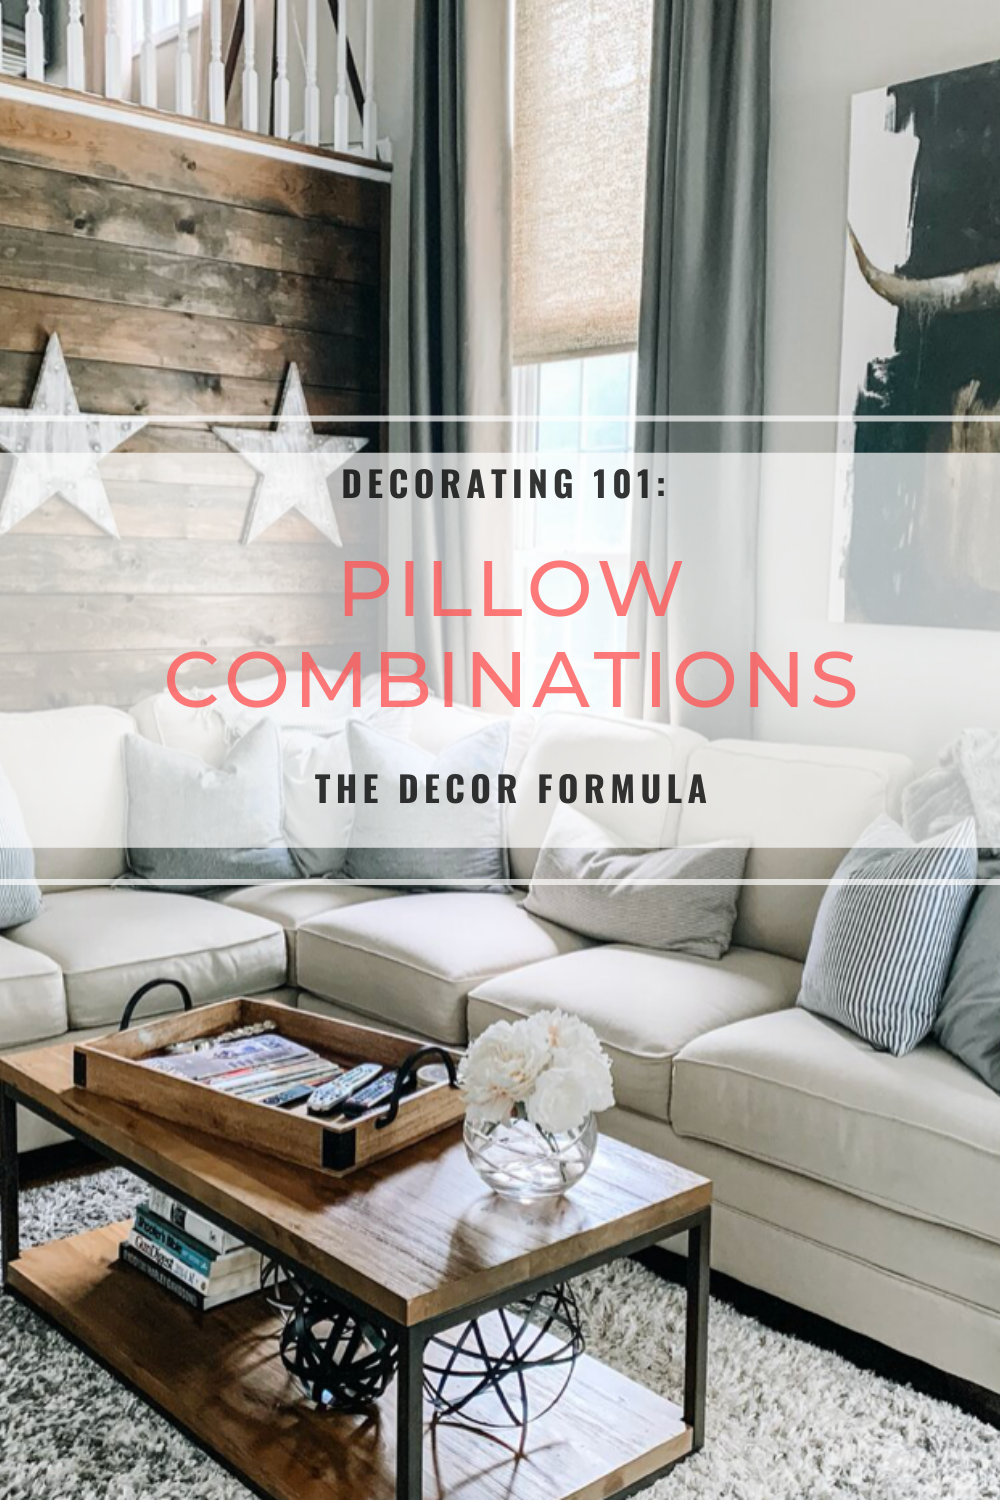 Ten Best Ways to Arrange Pillows on a Couch